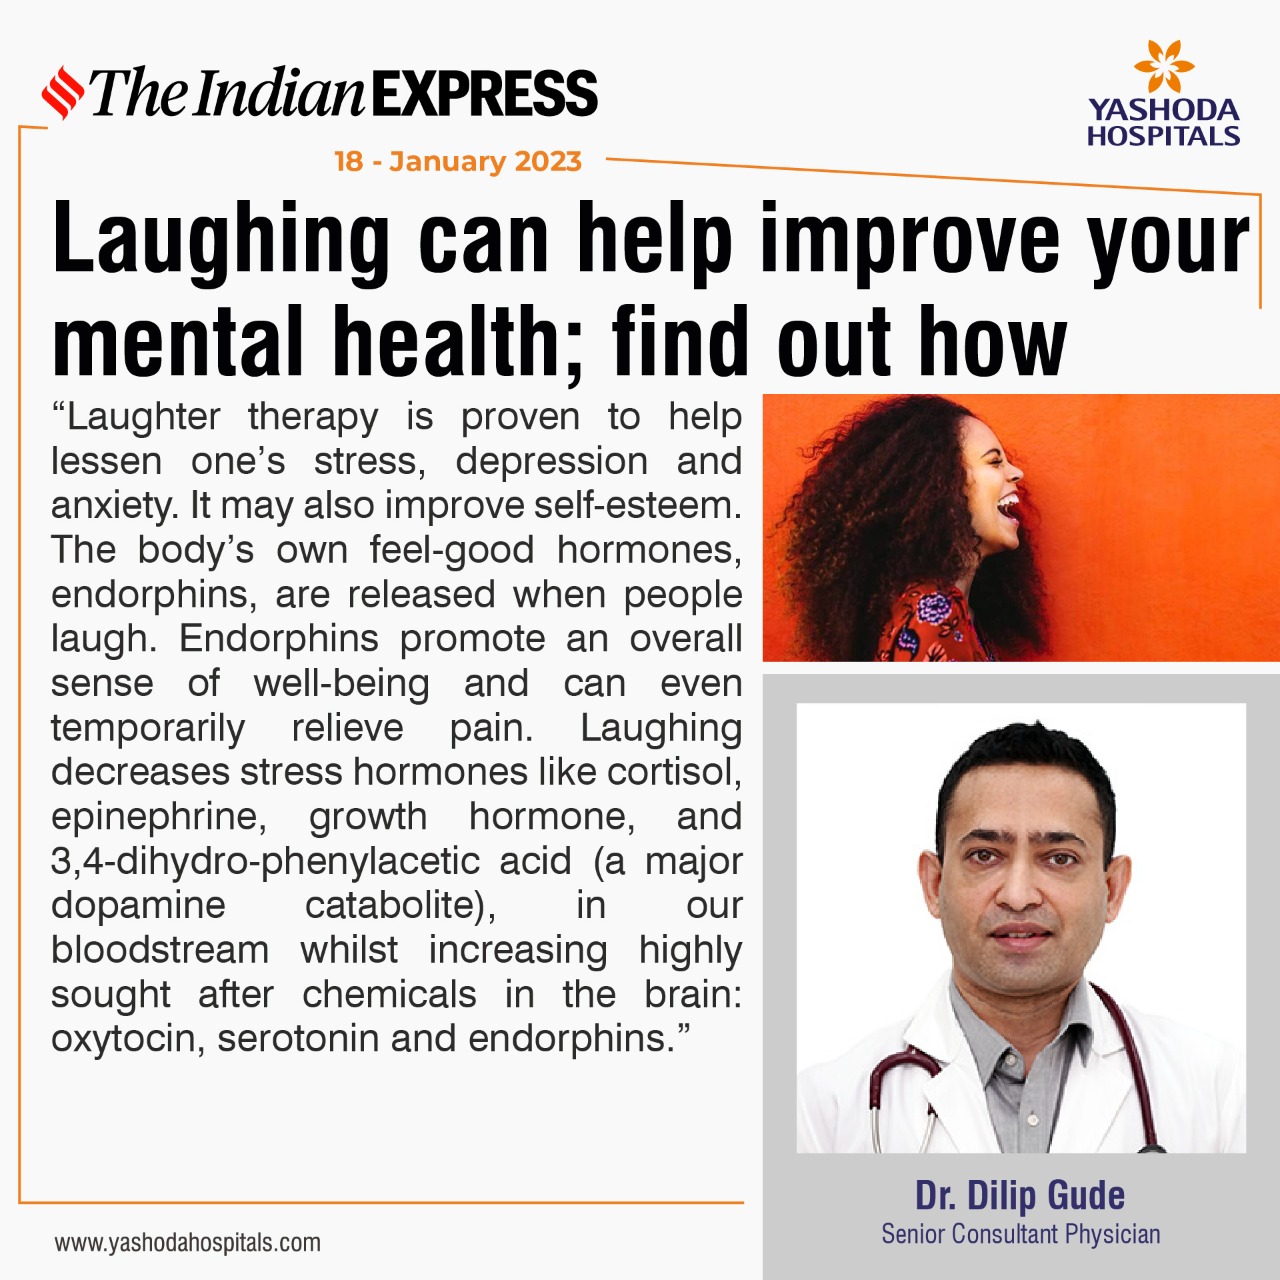 Laughter therapy is proven to help lessen one’s stress, depression and anxiety.